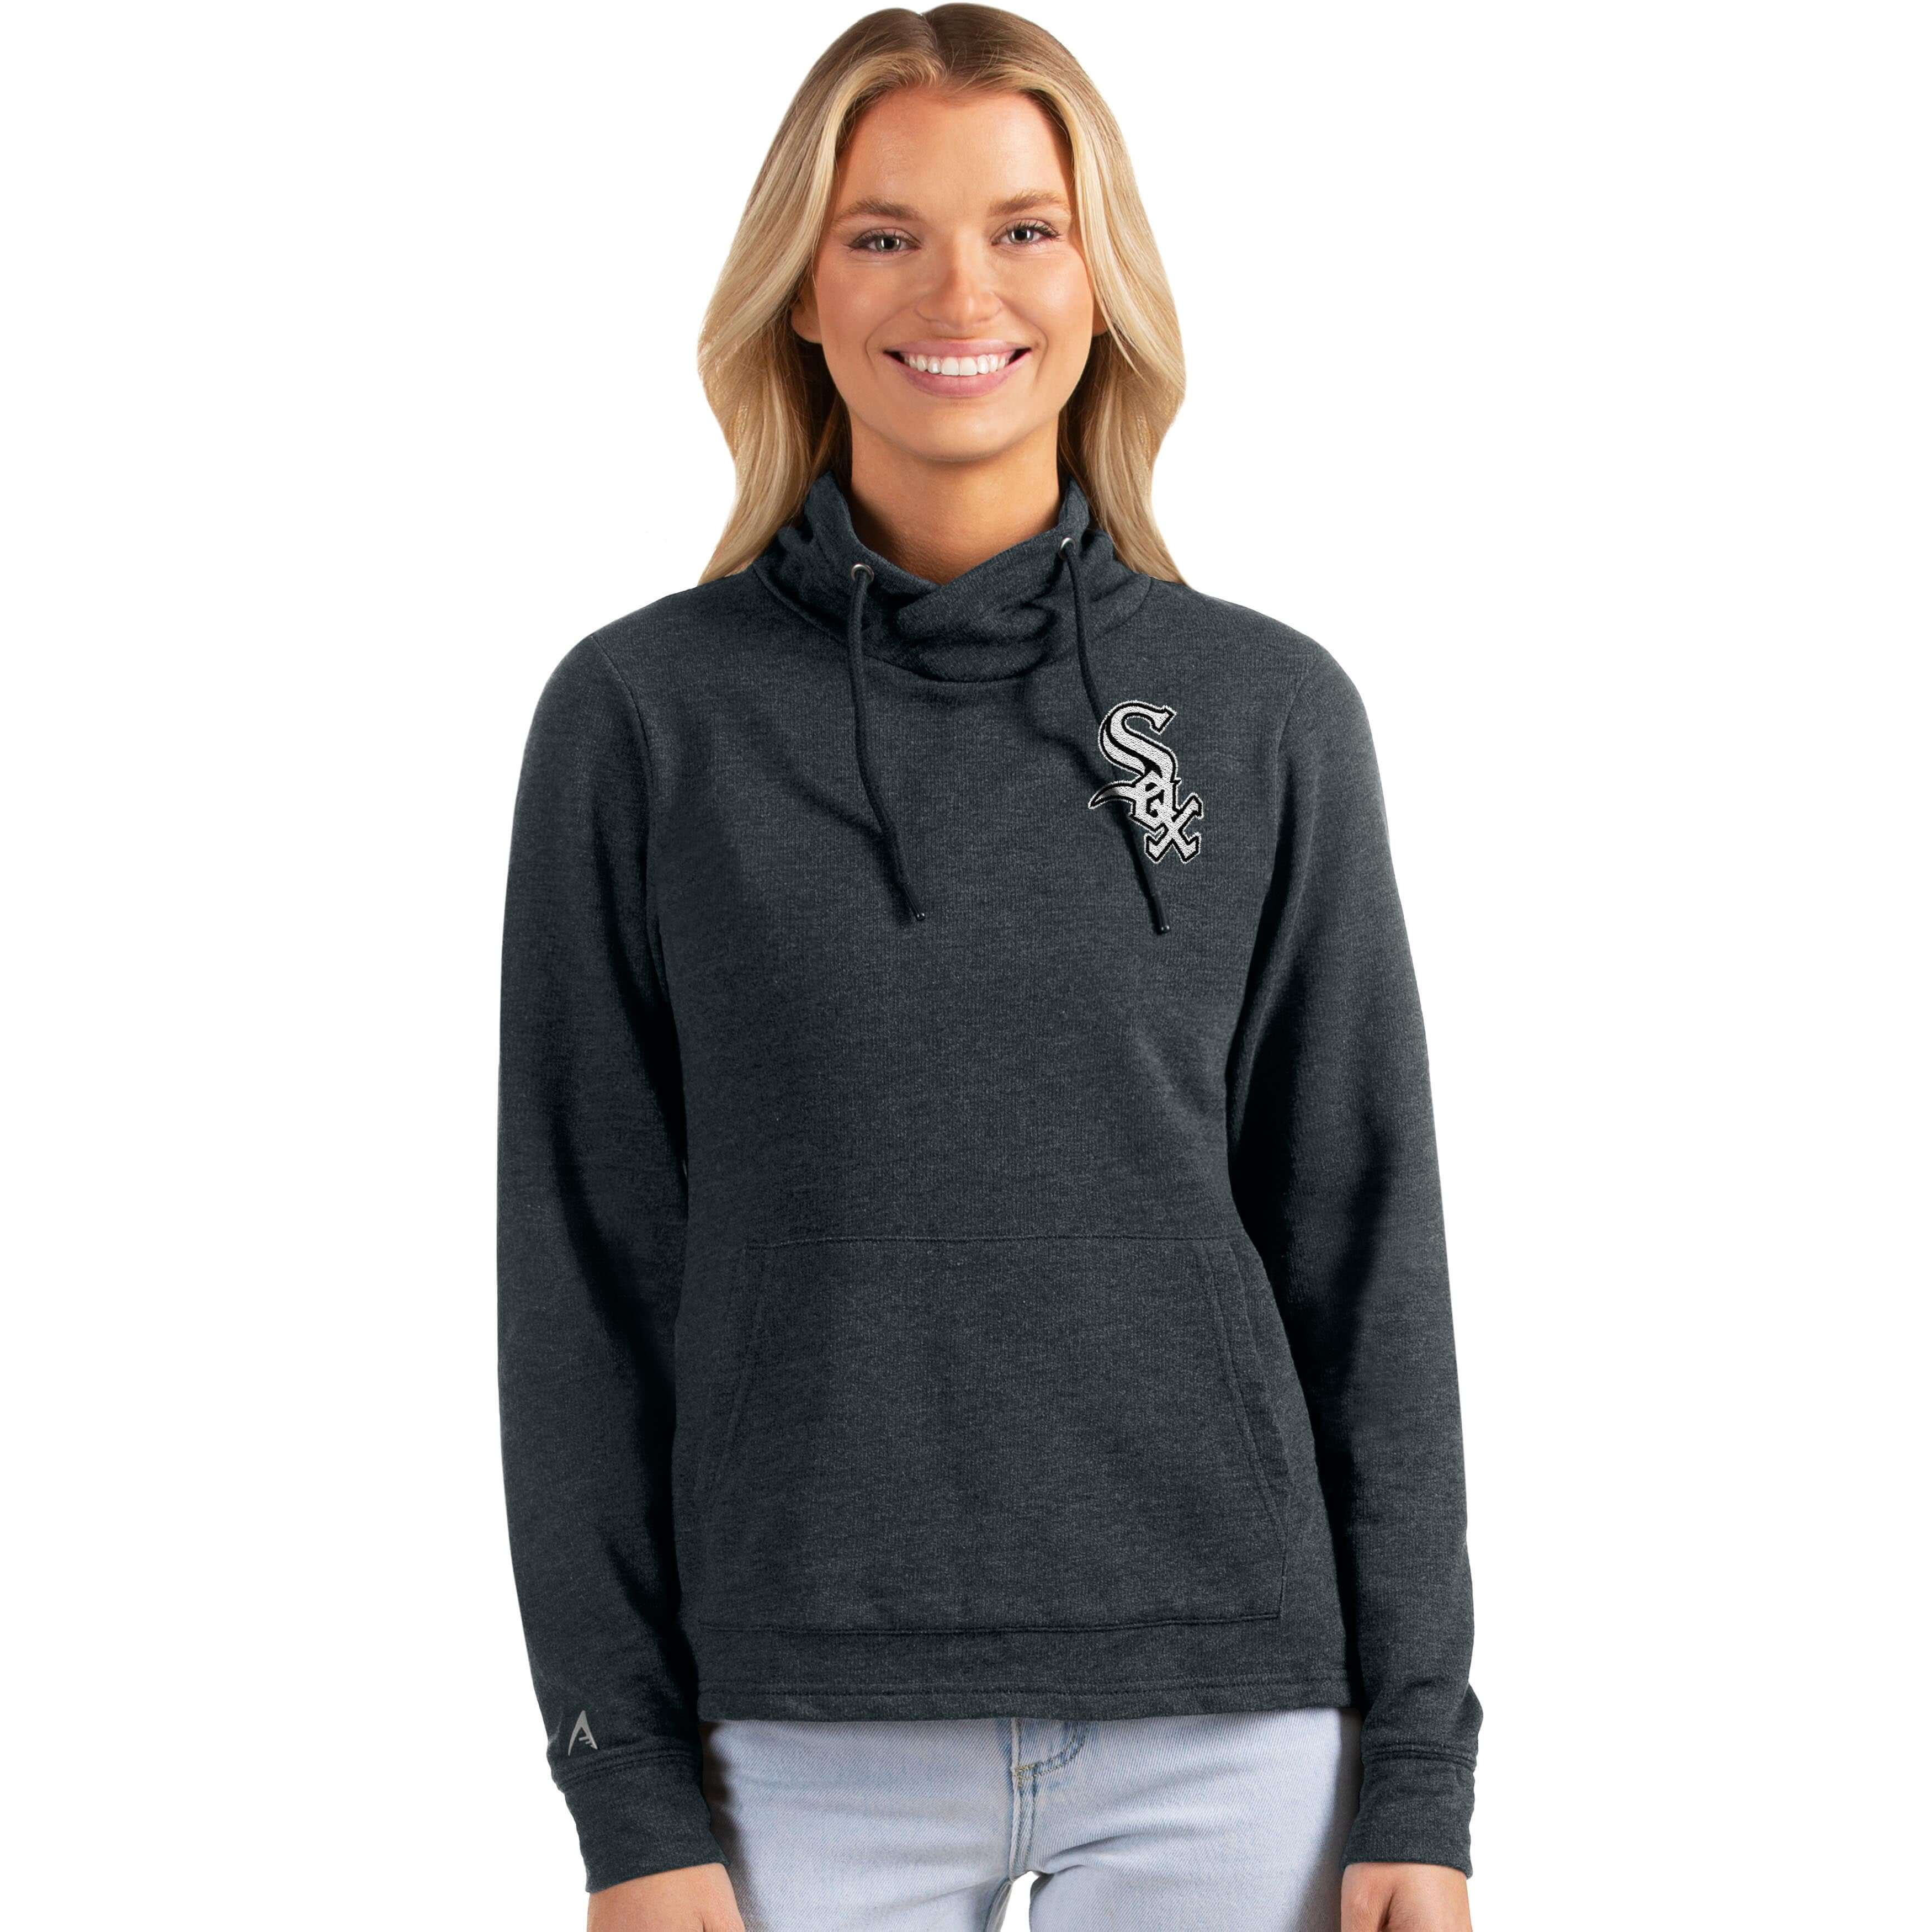 Women's Refried Apparel Heathered Gray/Black Chicago White Sox Hoodie Dress